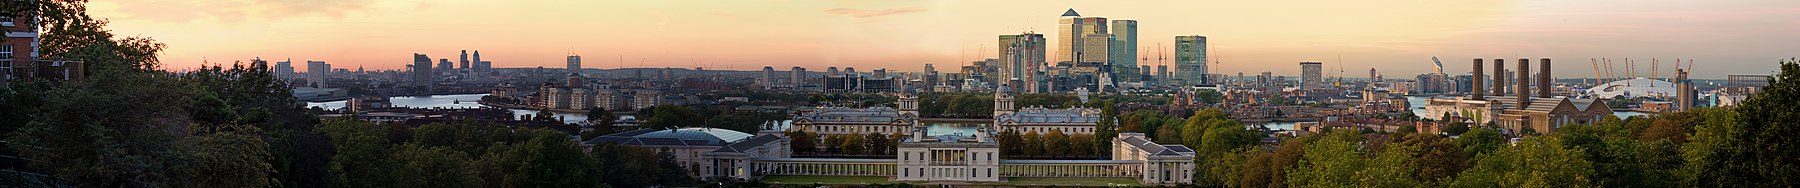 A wide view of London from the Royal Observatory in Greenwich Park